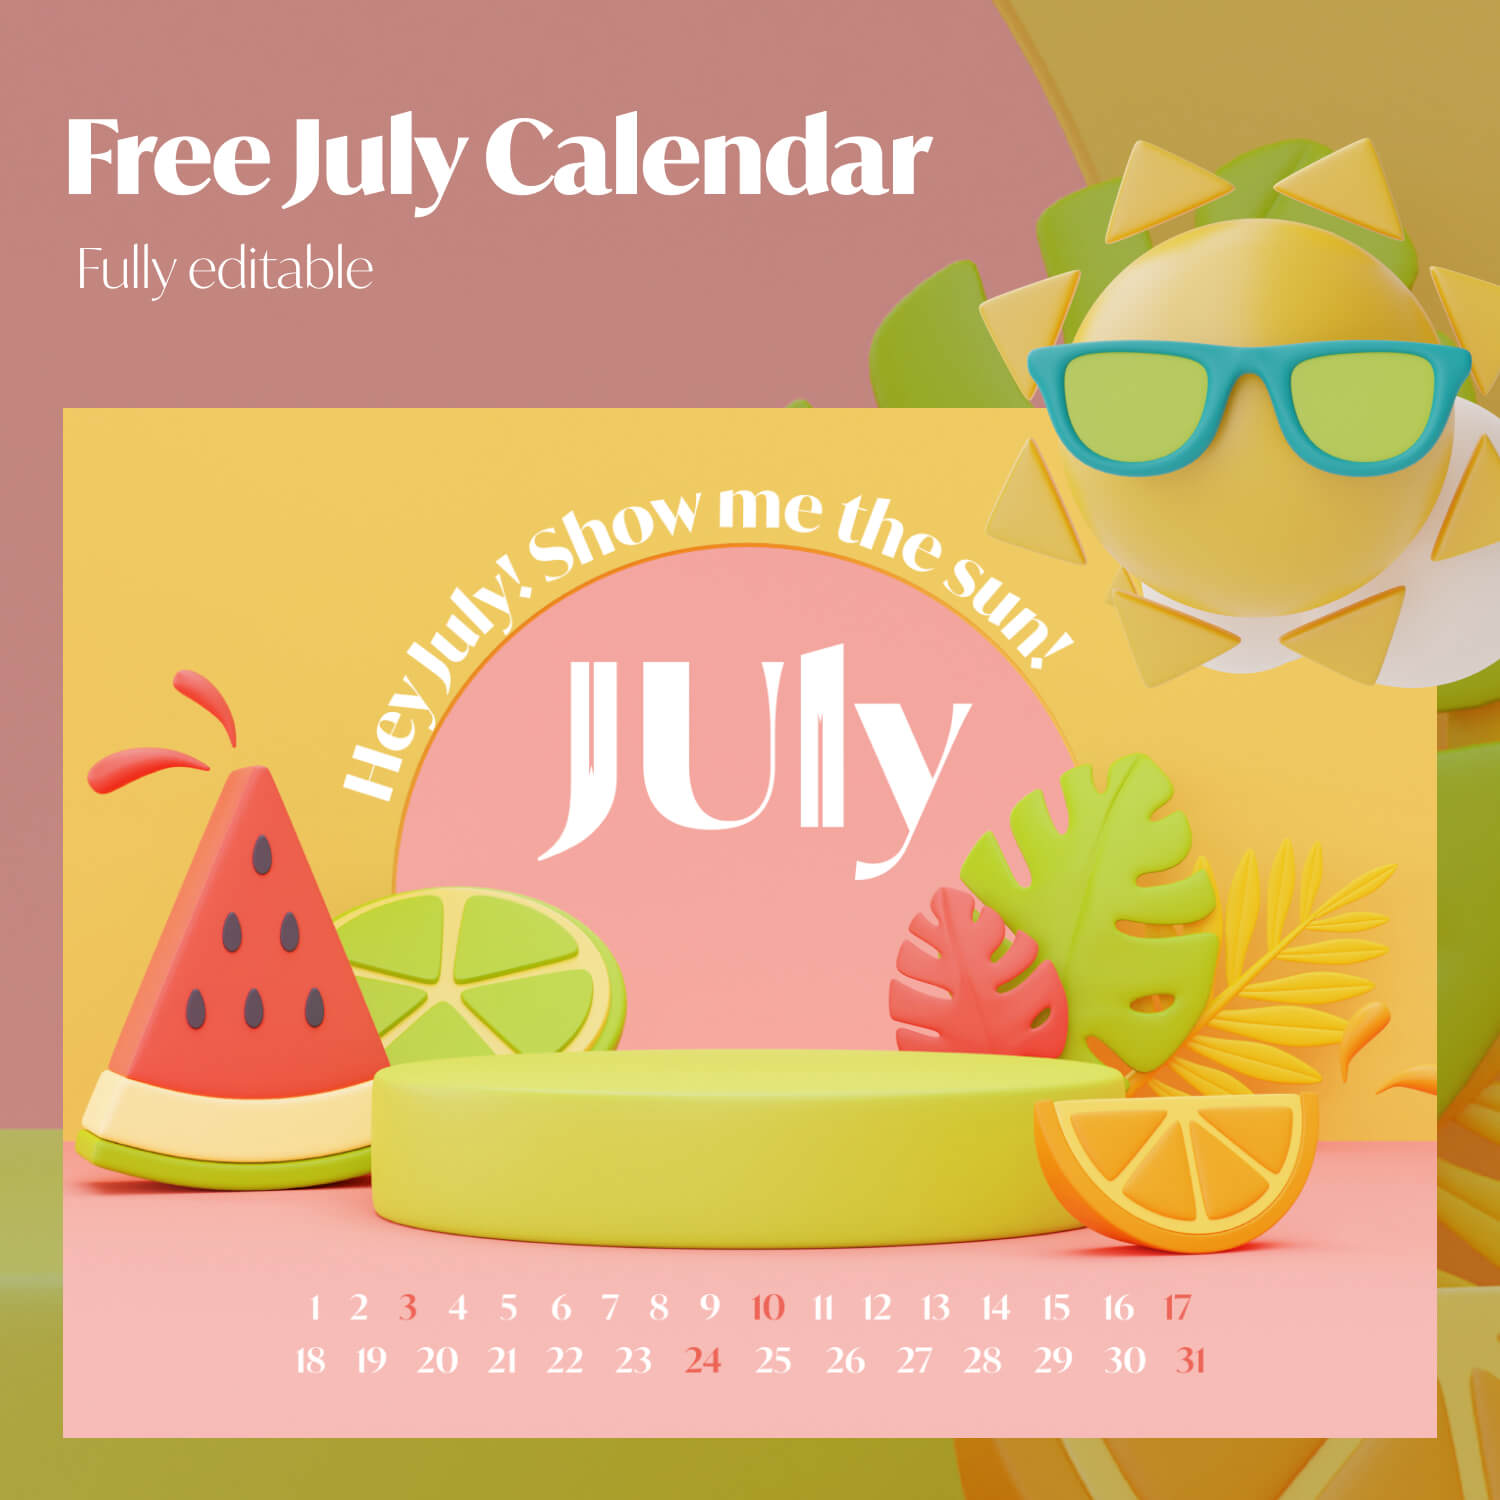 Free Watermelon July Calendar cover image.